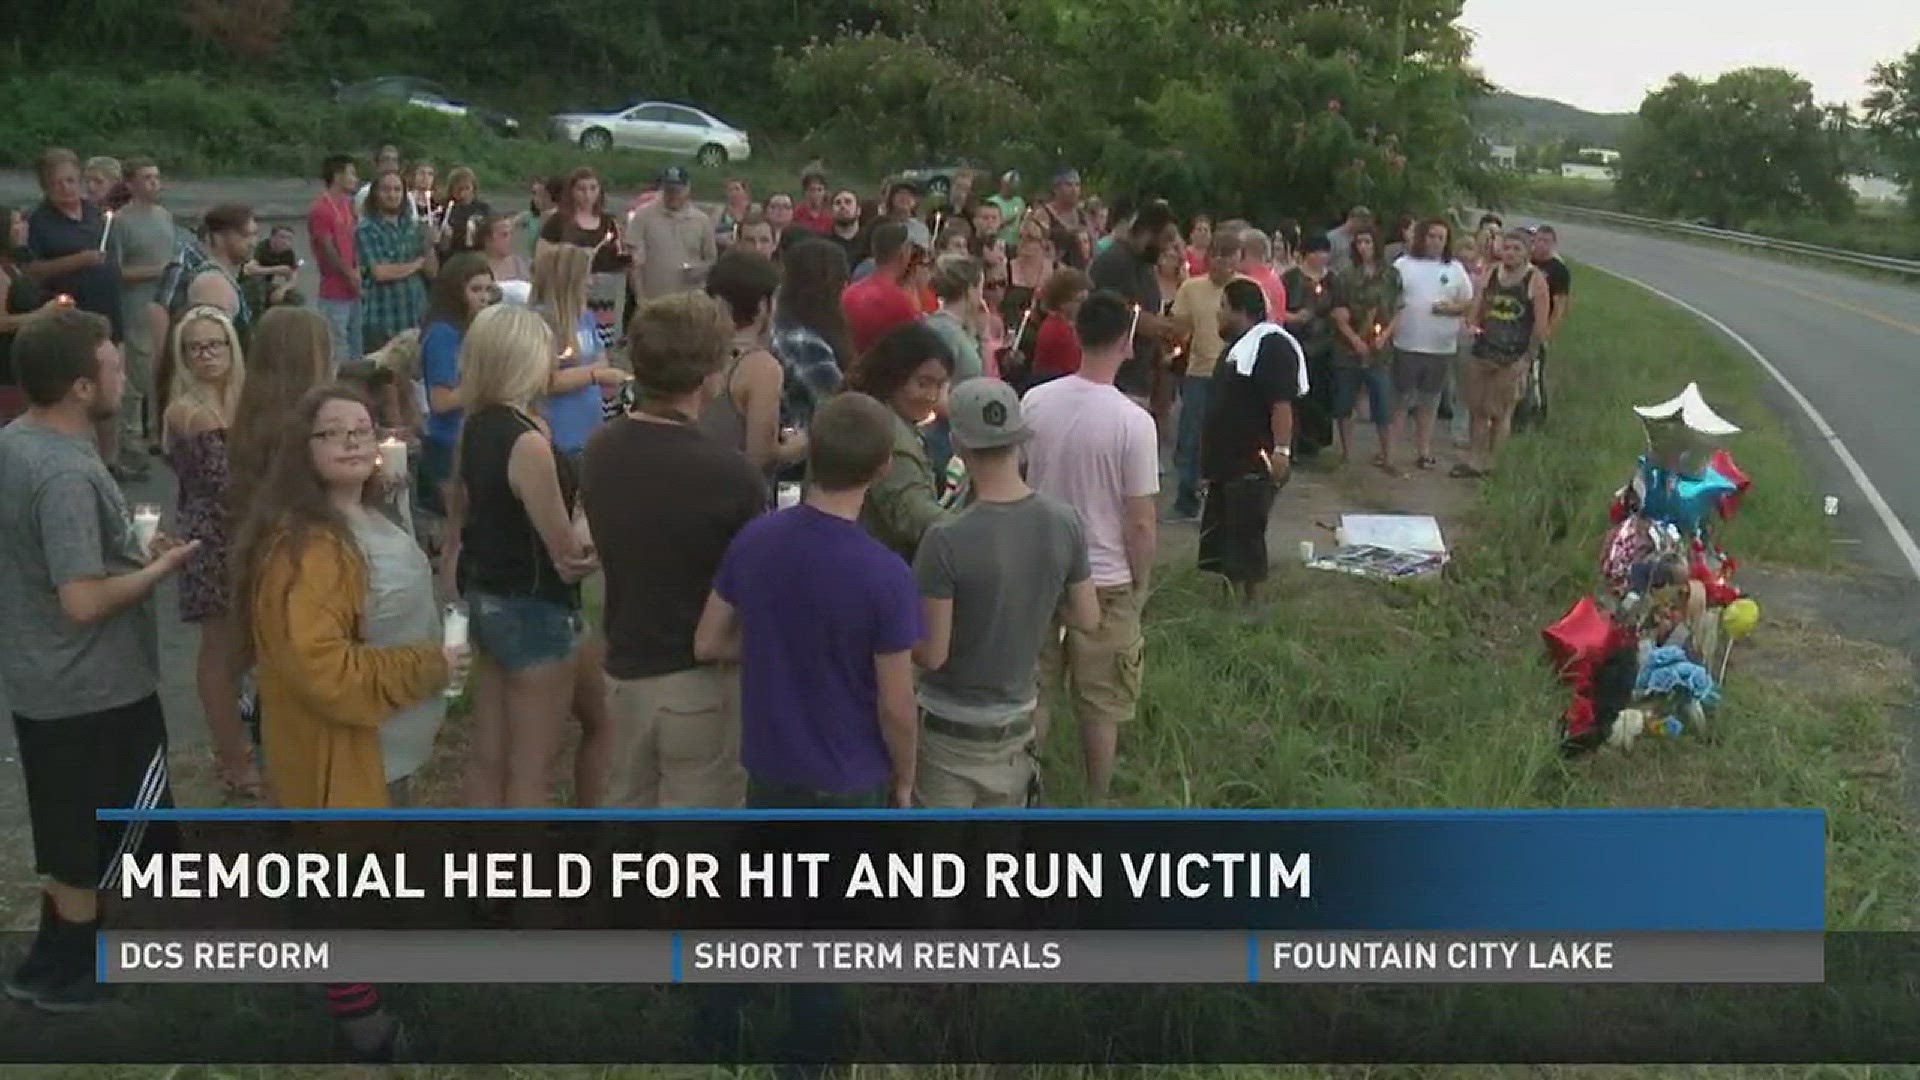 July 18, 2017: Family and friends gathered to honor a 19-year-old hit and killed by a car over the weekend.